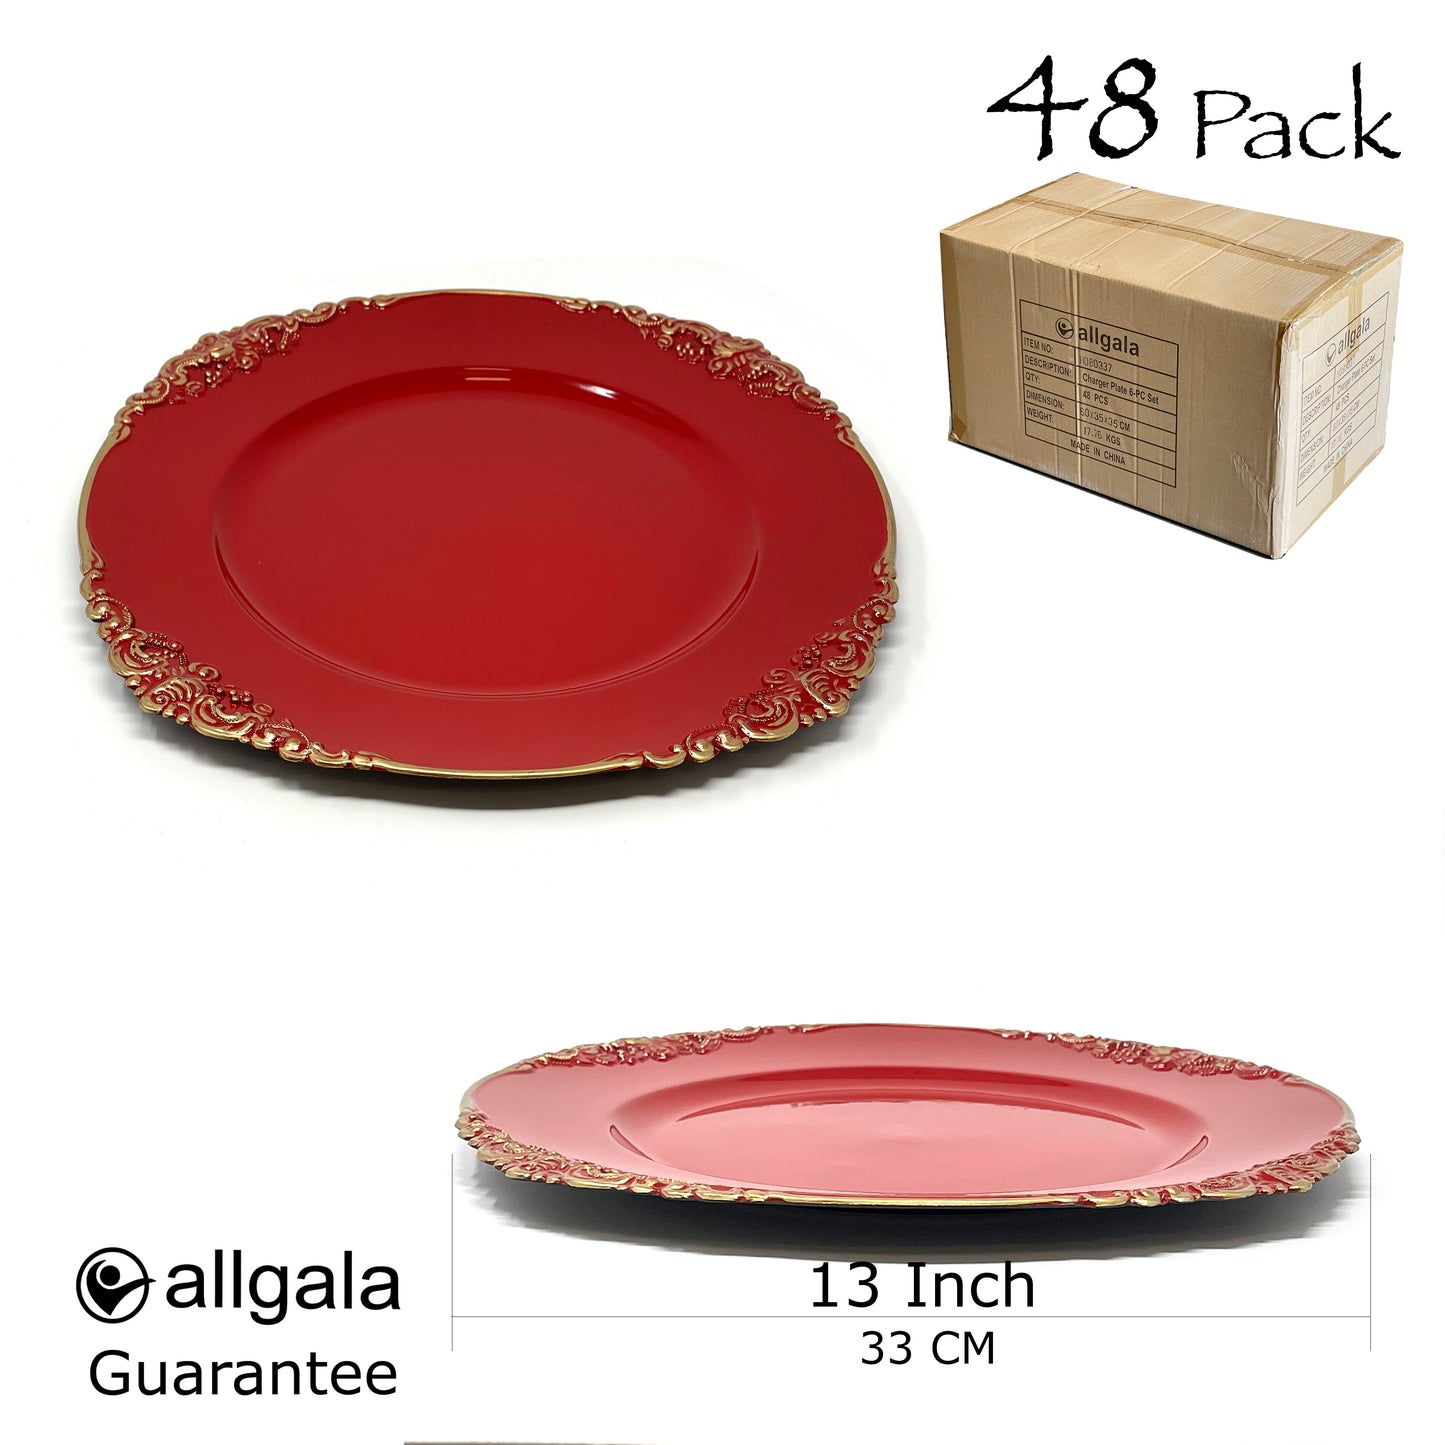 Allgala Charger Plates 13-Inch 6-Pack Heavy Quality Round Charger Plates-Floral